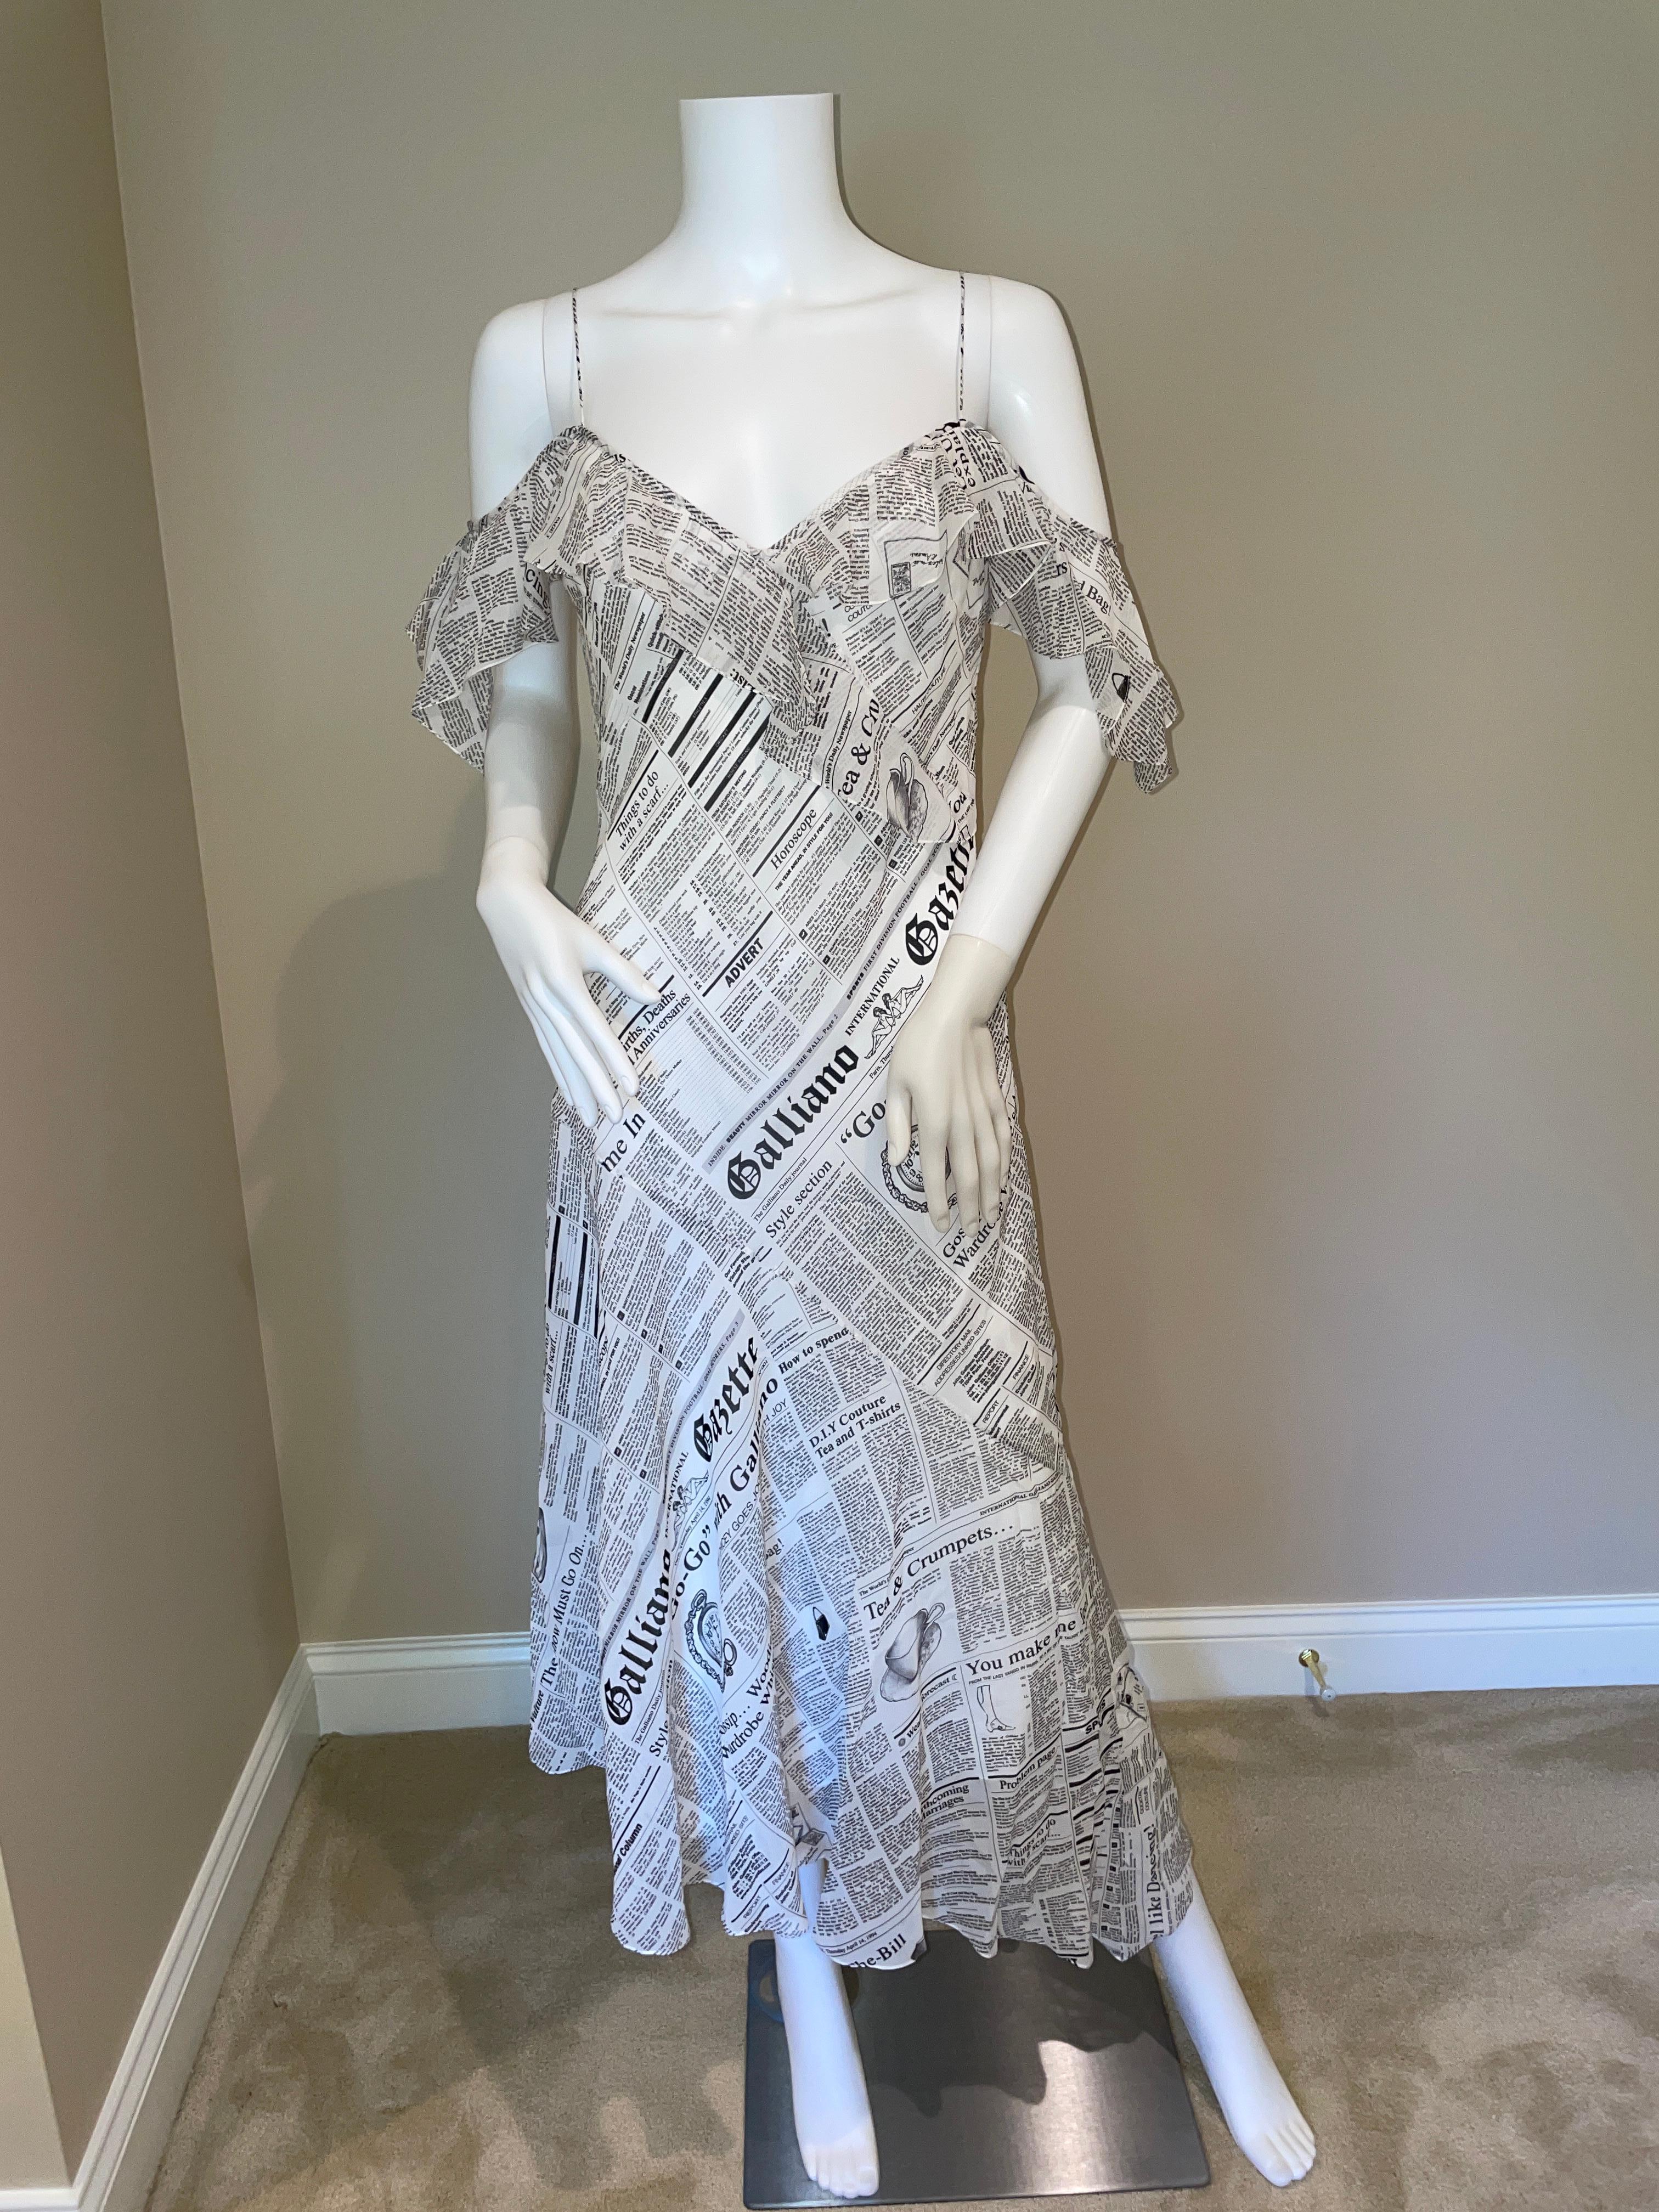 2018 or 2019 100% silk, John Galliano ruffle off-the-shoulder maxi dress. Newspaper gazette print, famous from SATC (sex and the city, dior carrie bradshaw vibes). No flaws, New with tags. F40.